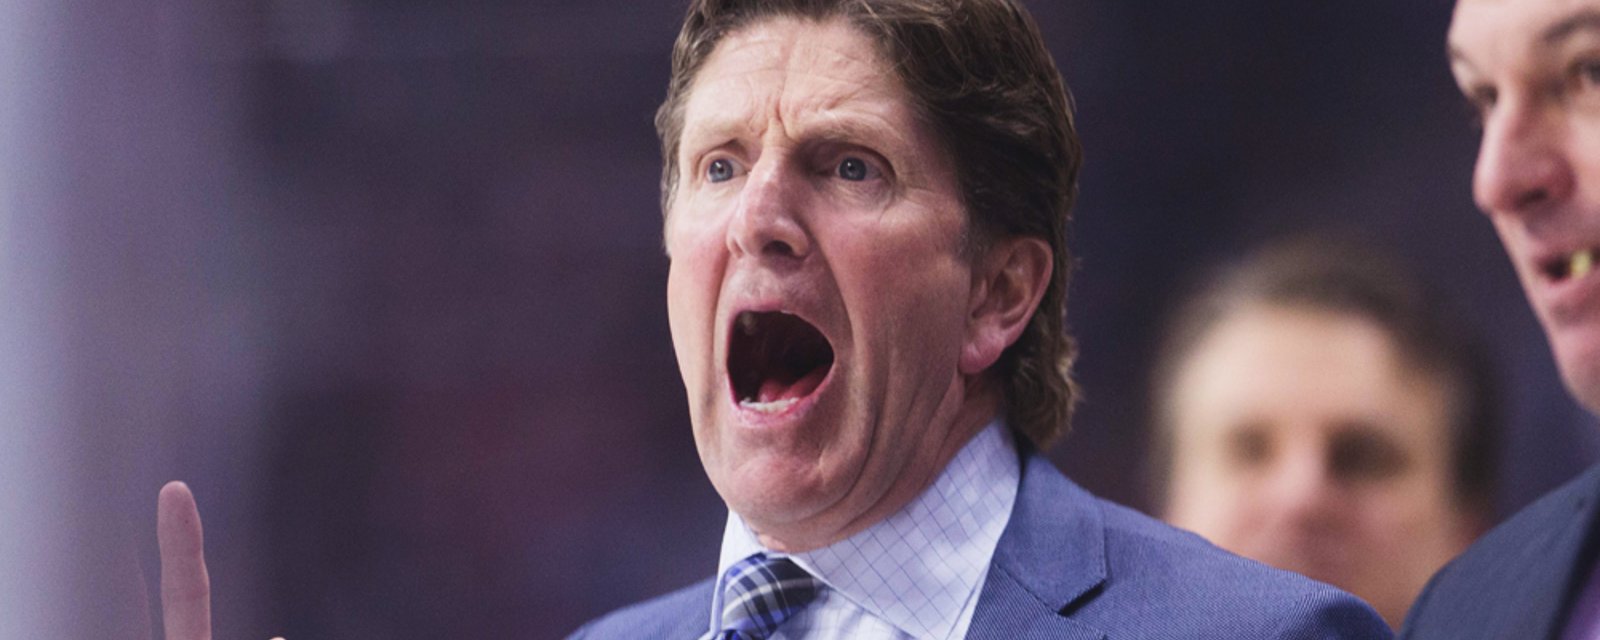 Former Stanley Cup champion publicly calls Mike Babcock a “piece of sh*t.”